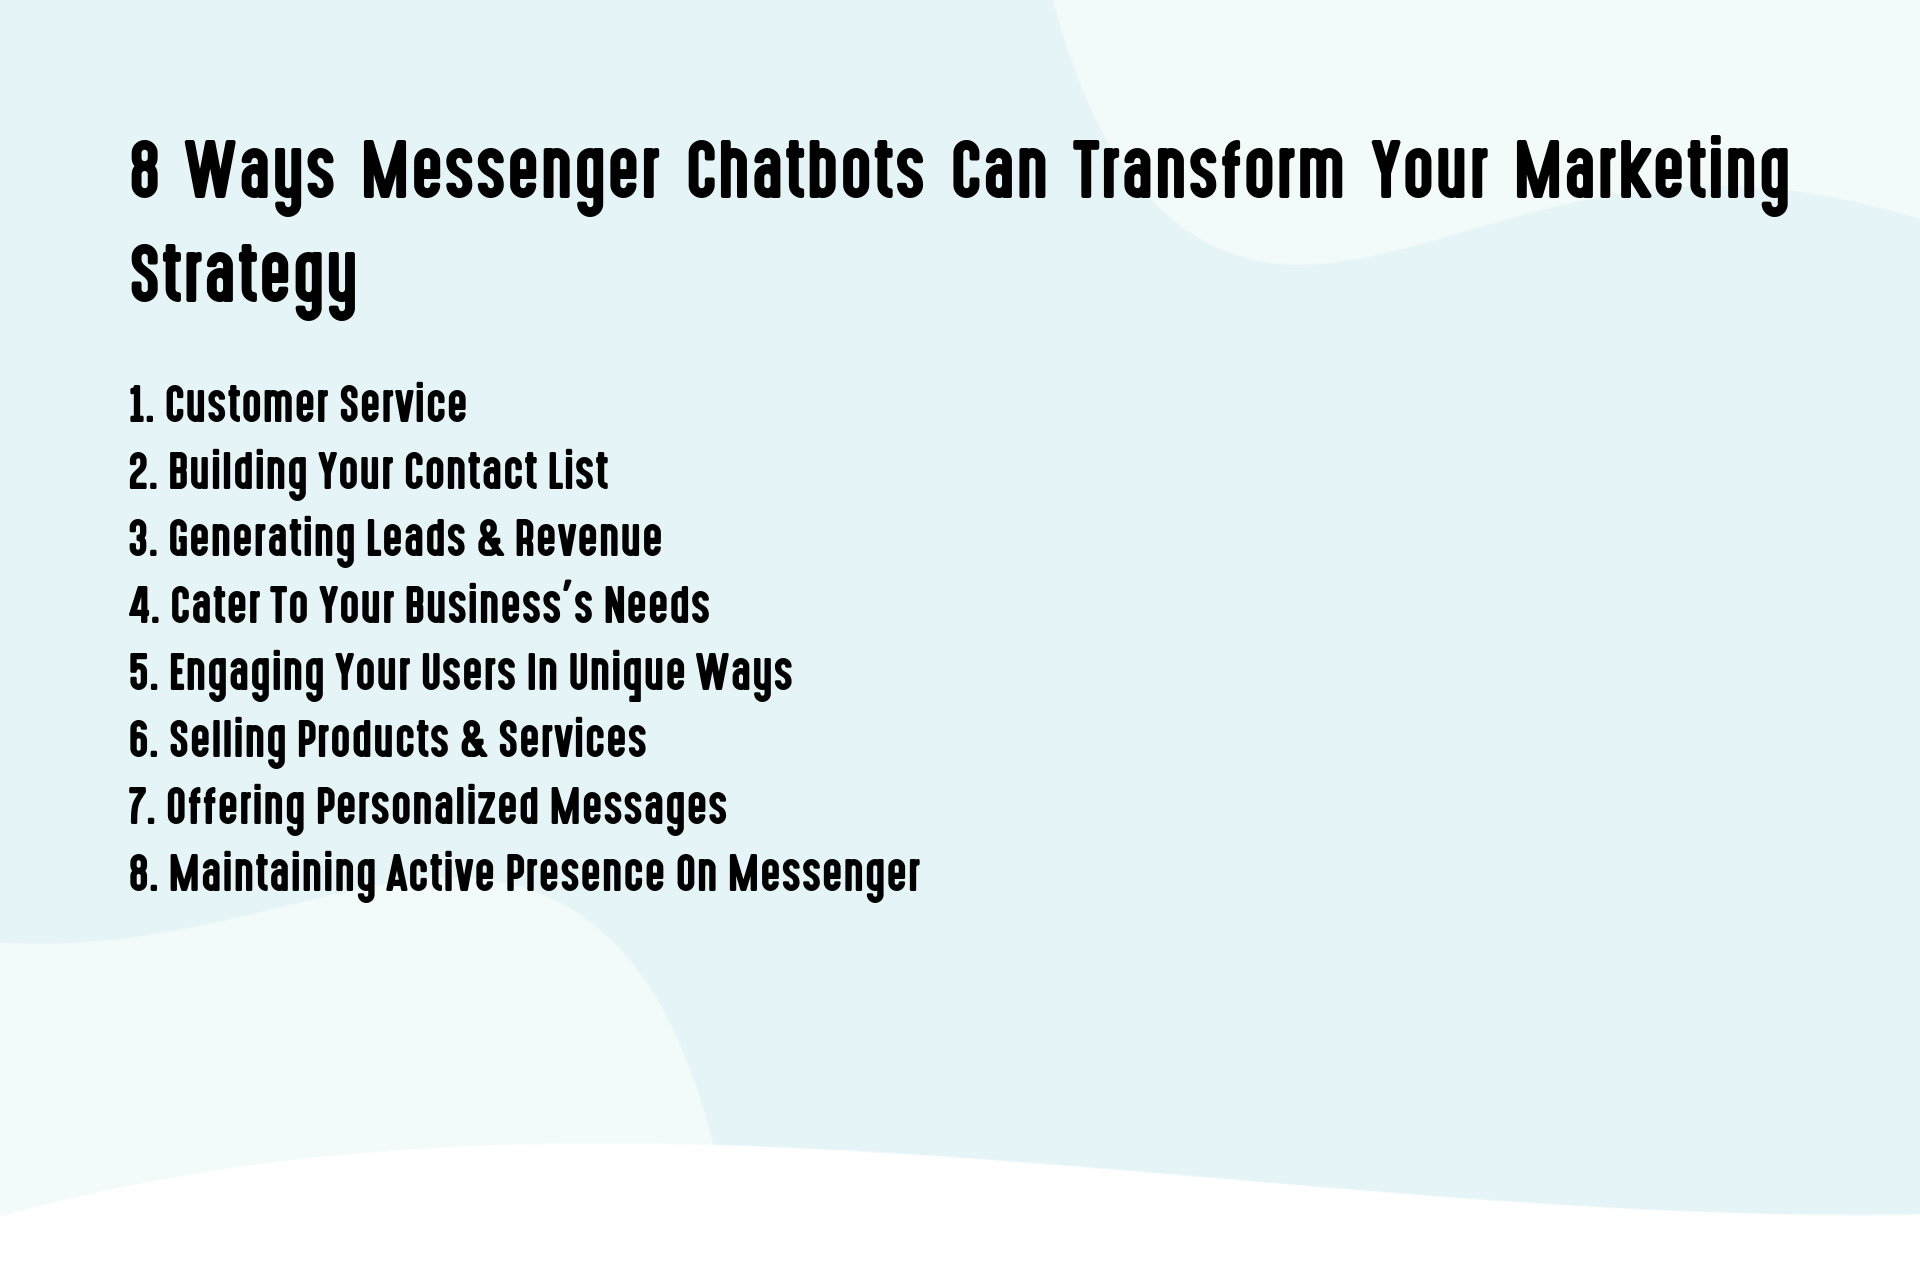 8 Ways Messenger Chatbots Can Transform Your Marketing Strategy